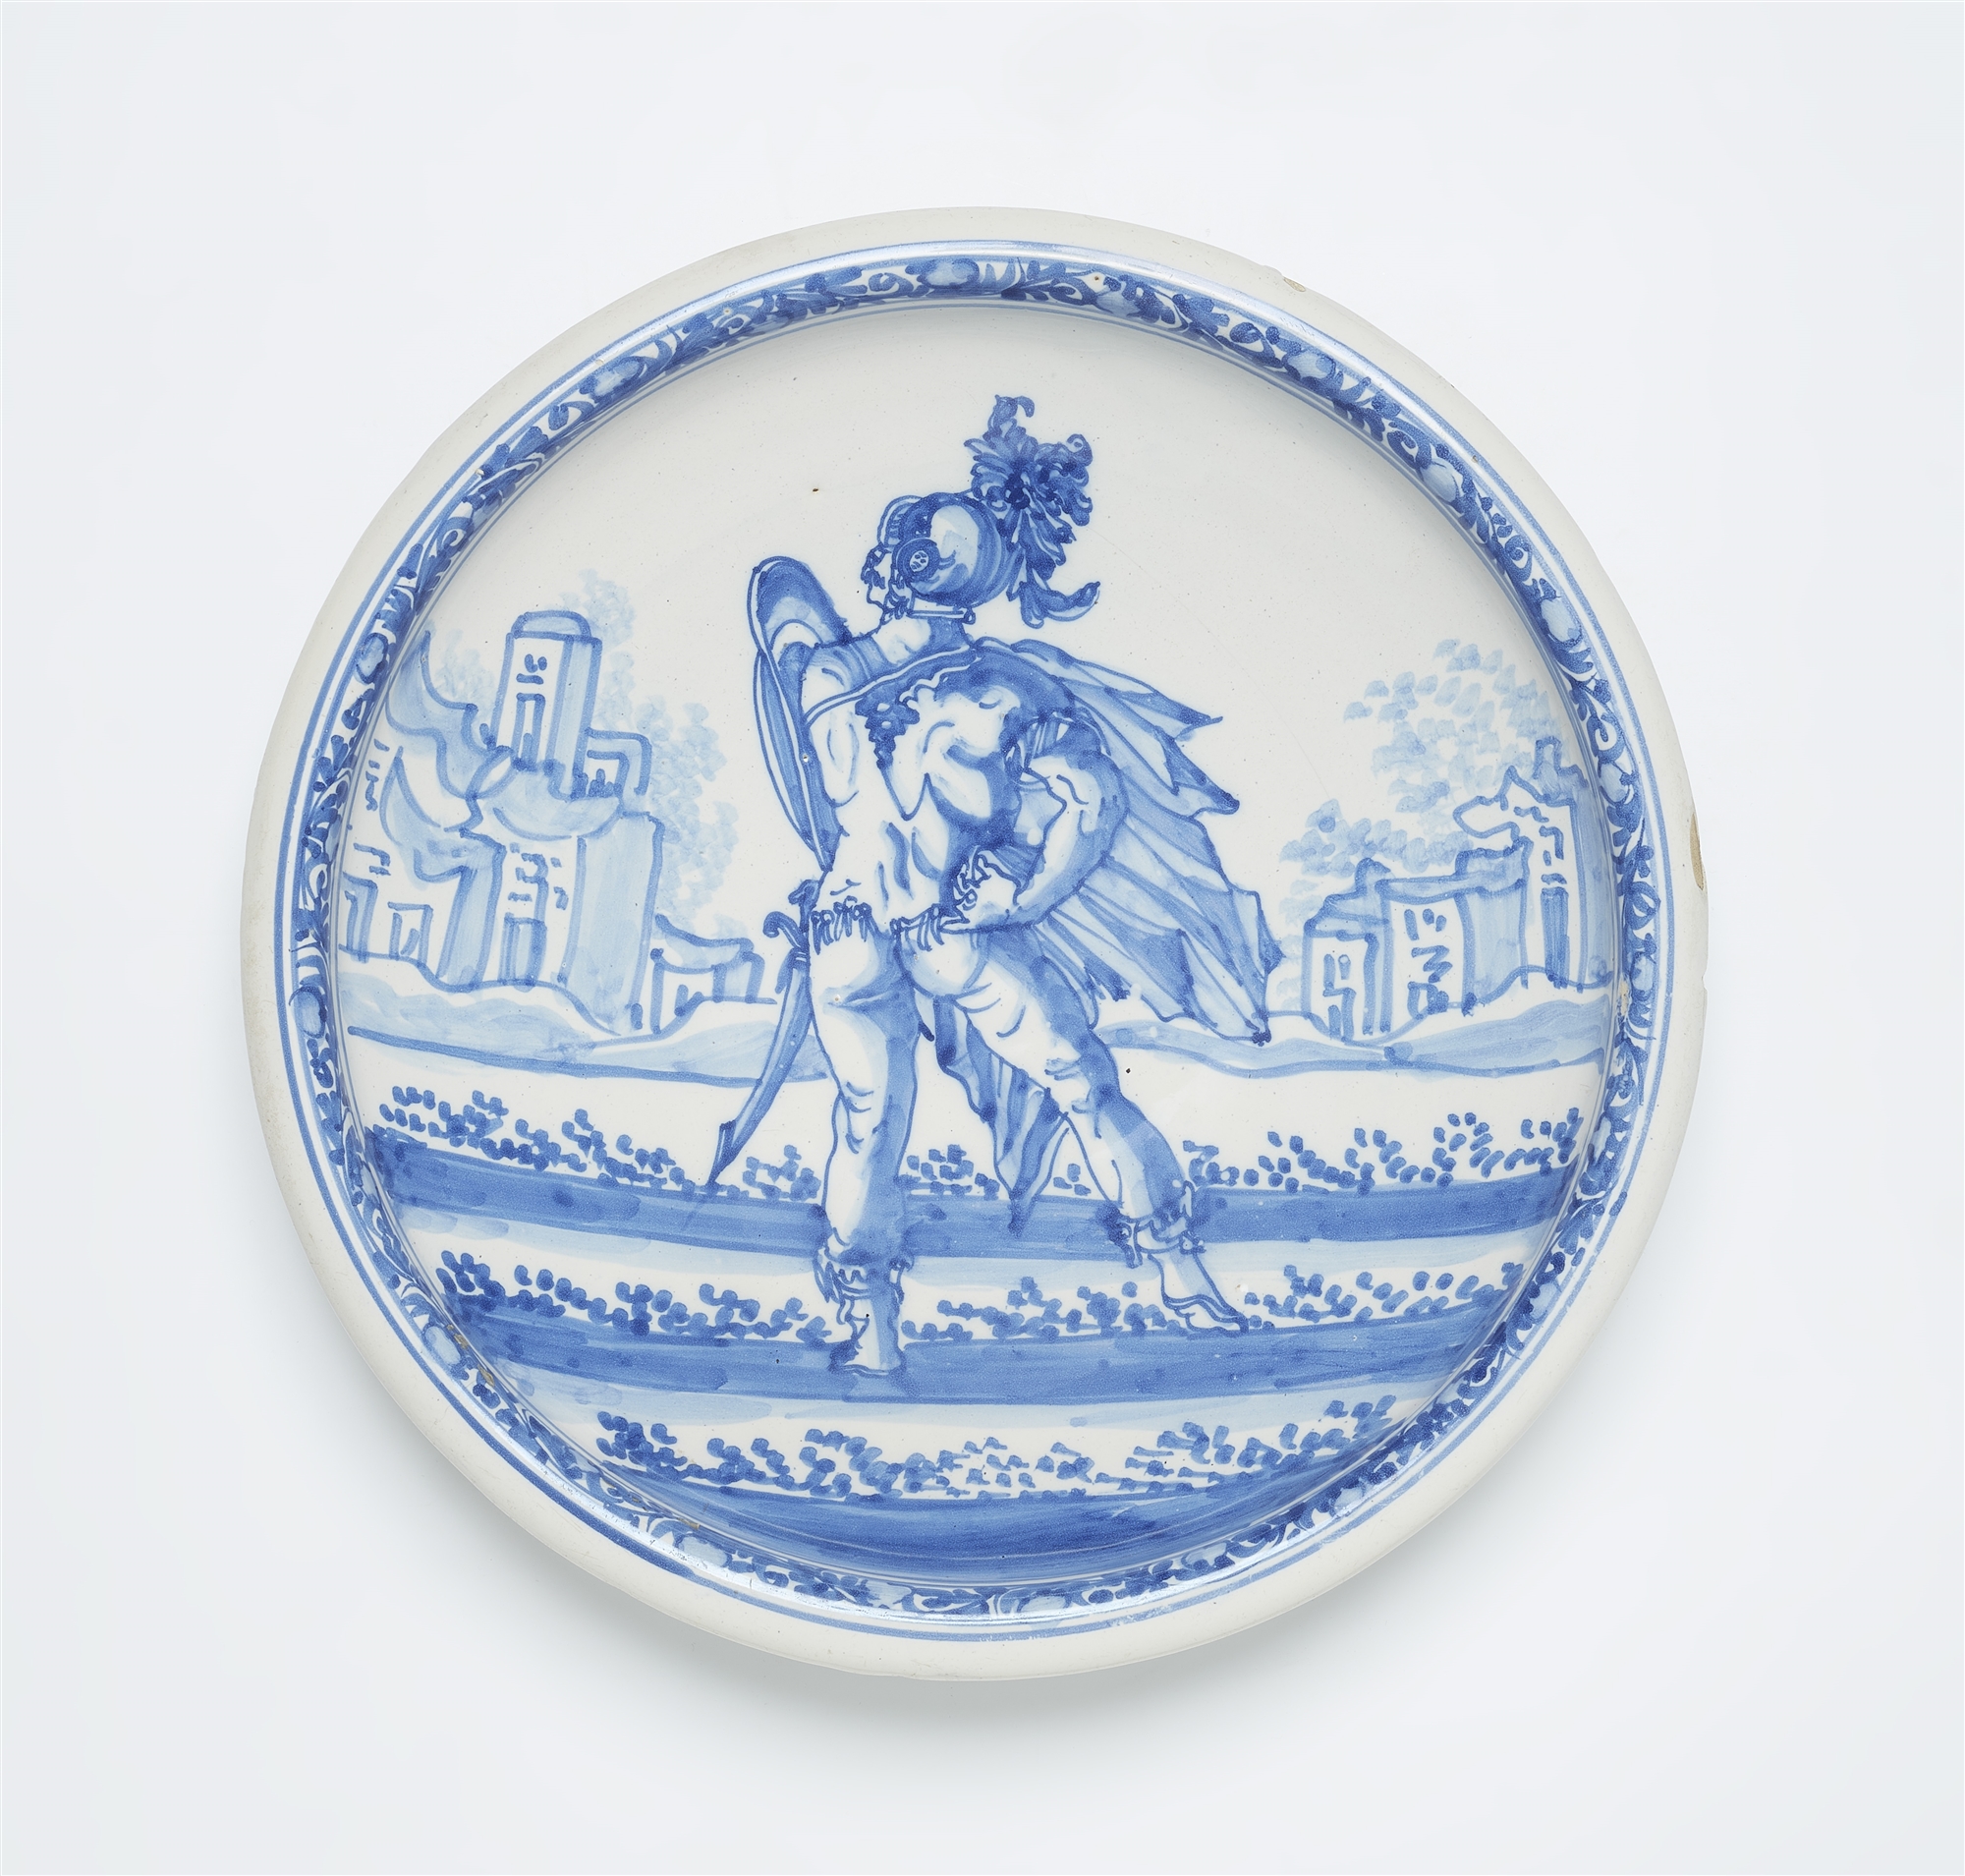 A faience dish with a soldier motif